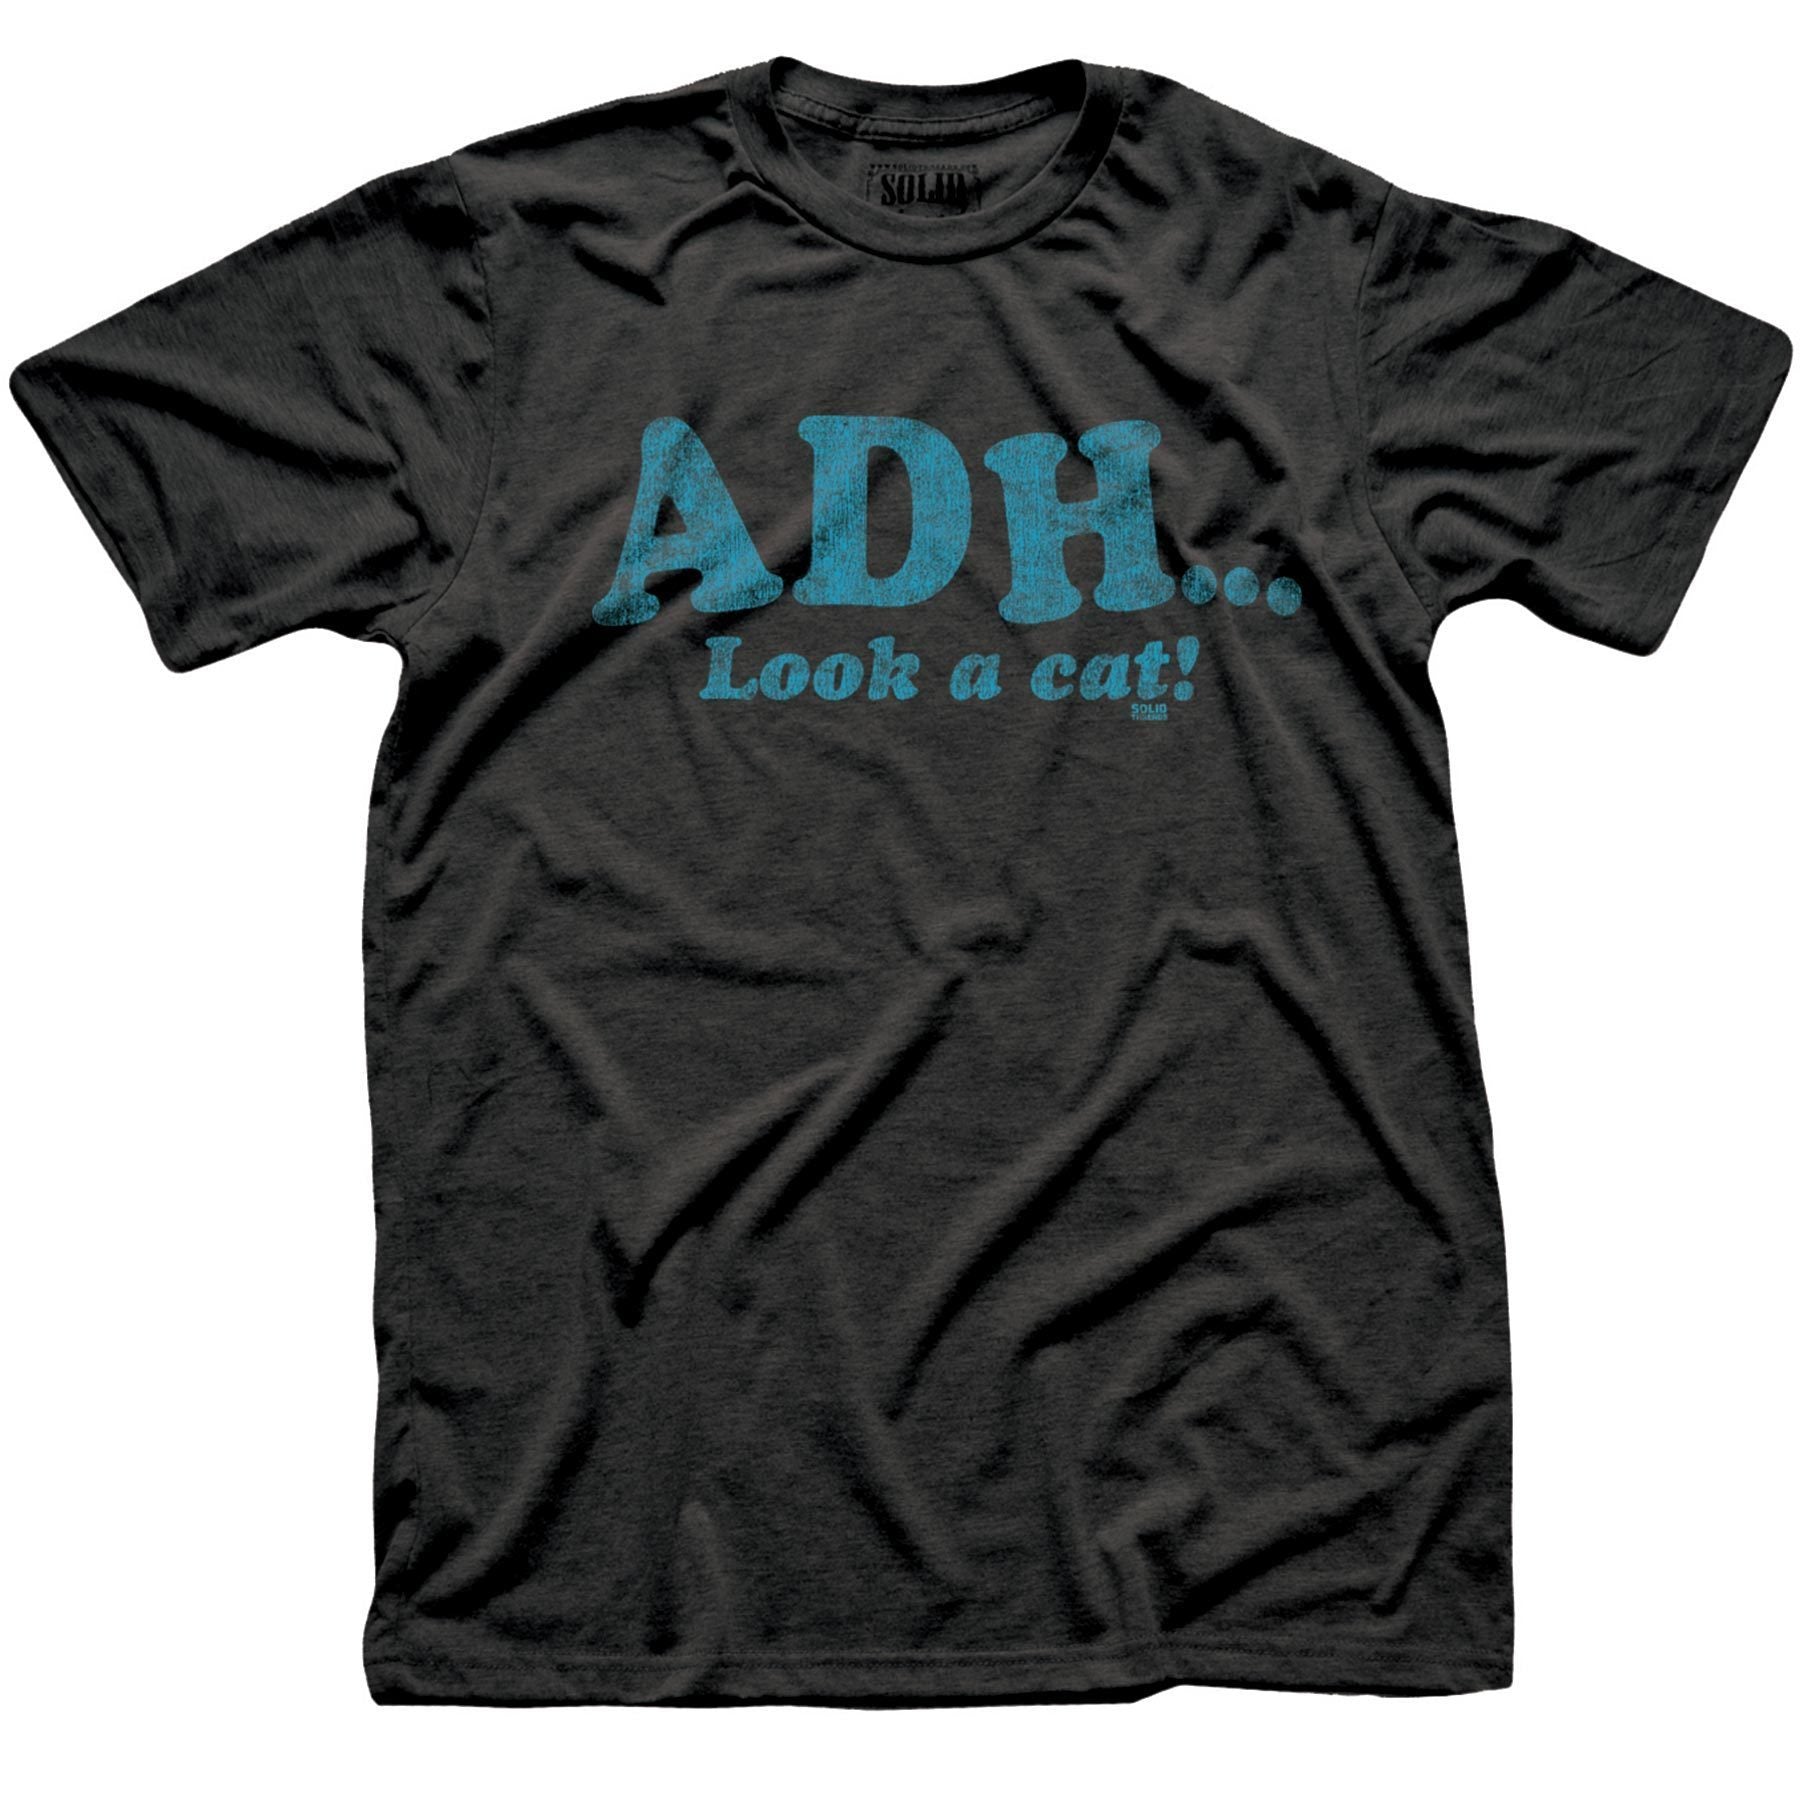 Men's Adh….Look A Cat! Vintage Daydreamer Graphic T-Shirt | Funny Stoner Tee | Solid Threads